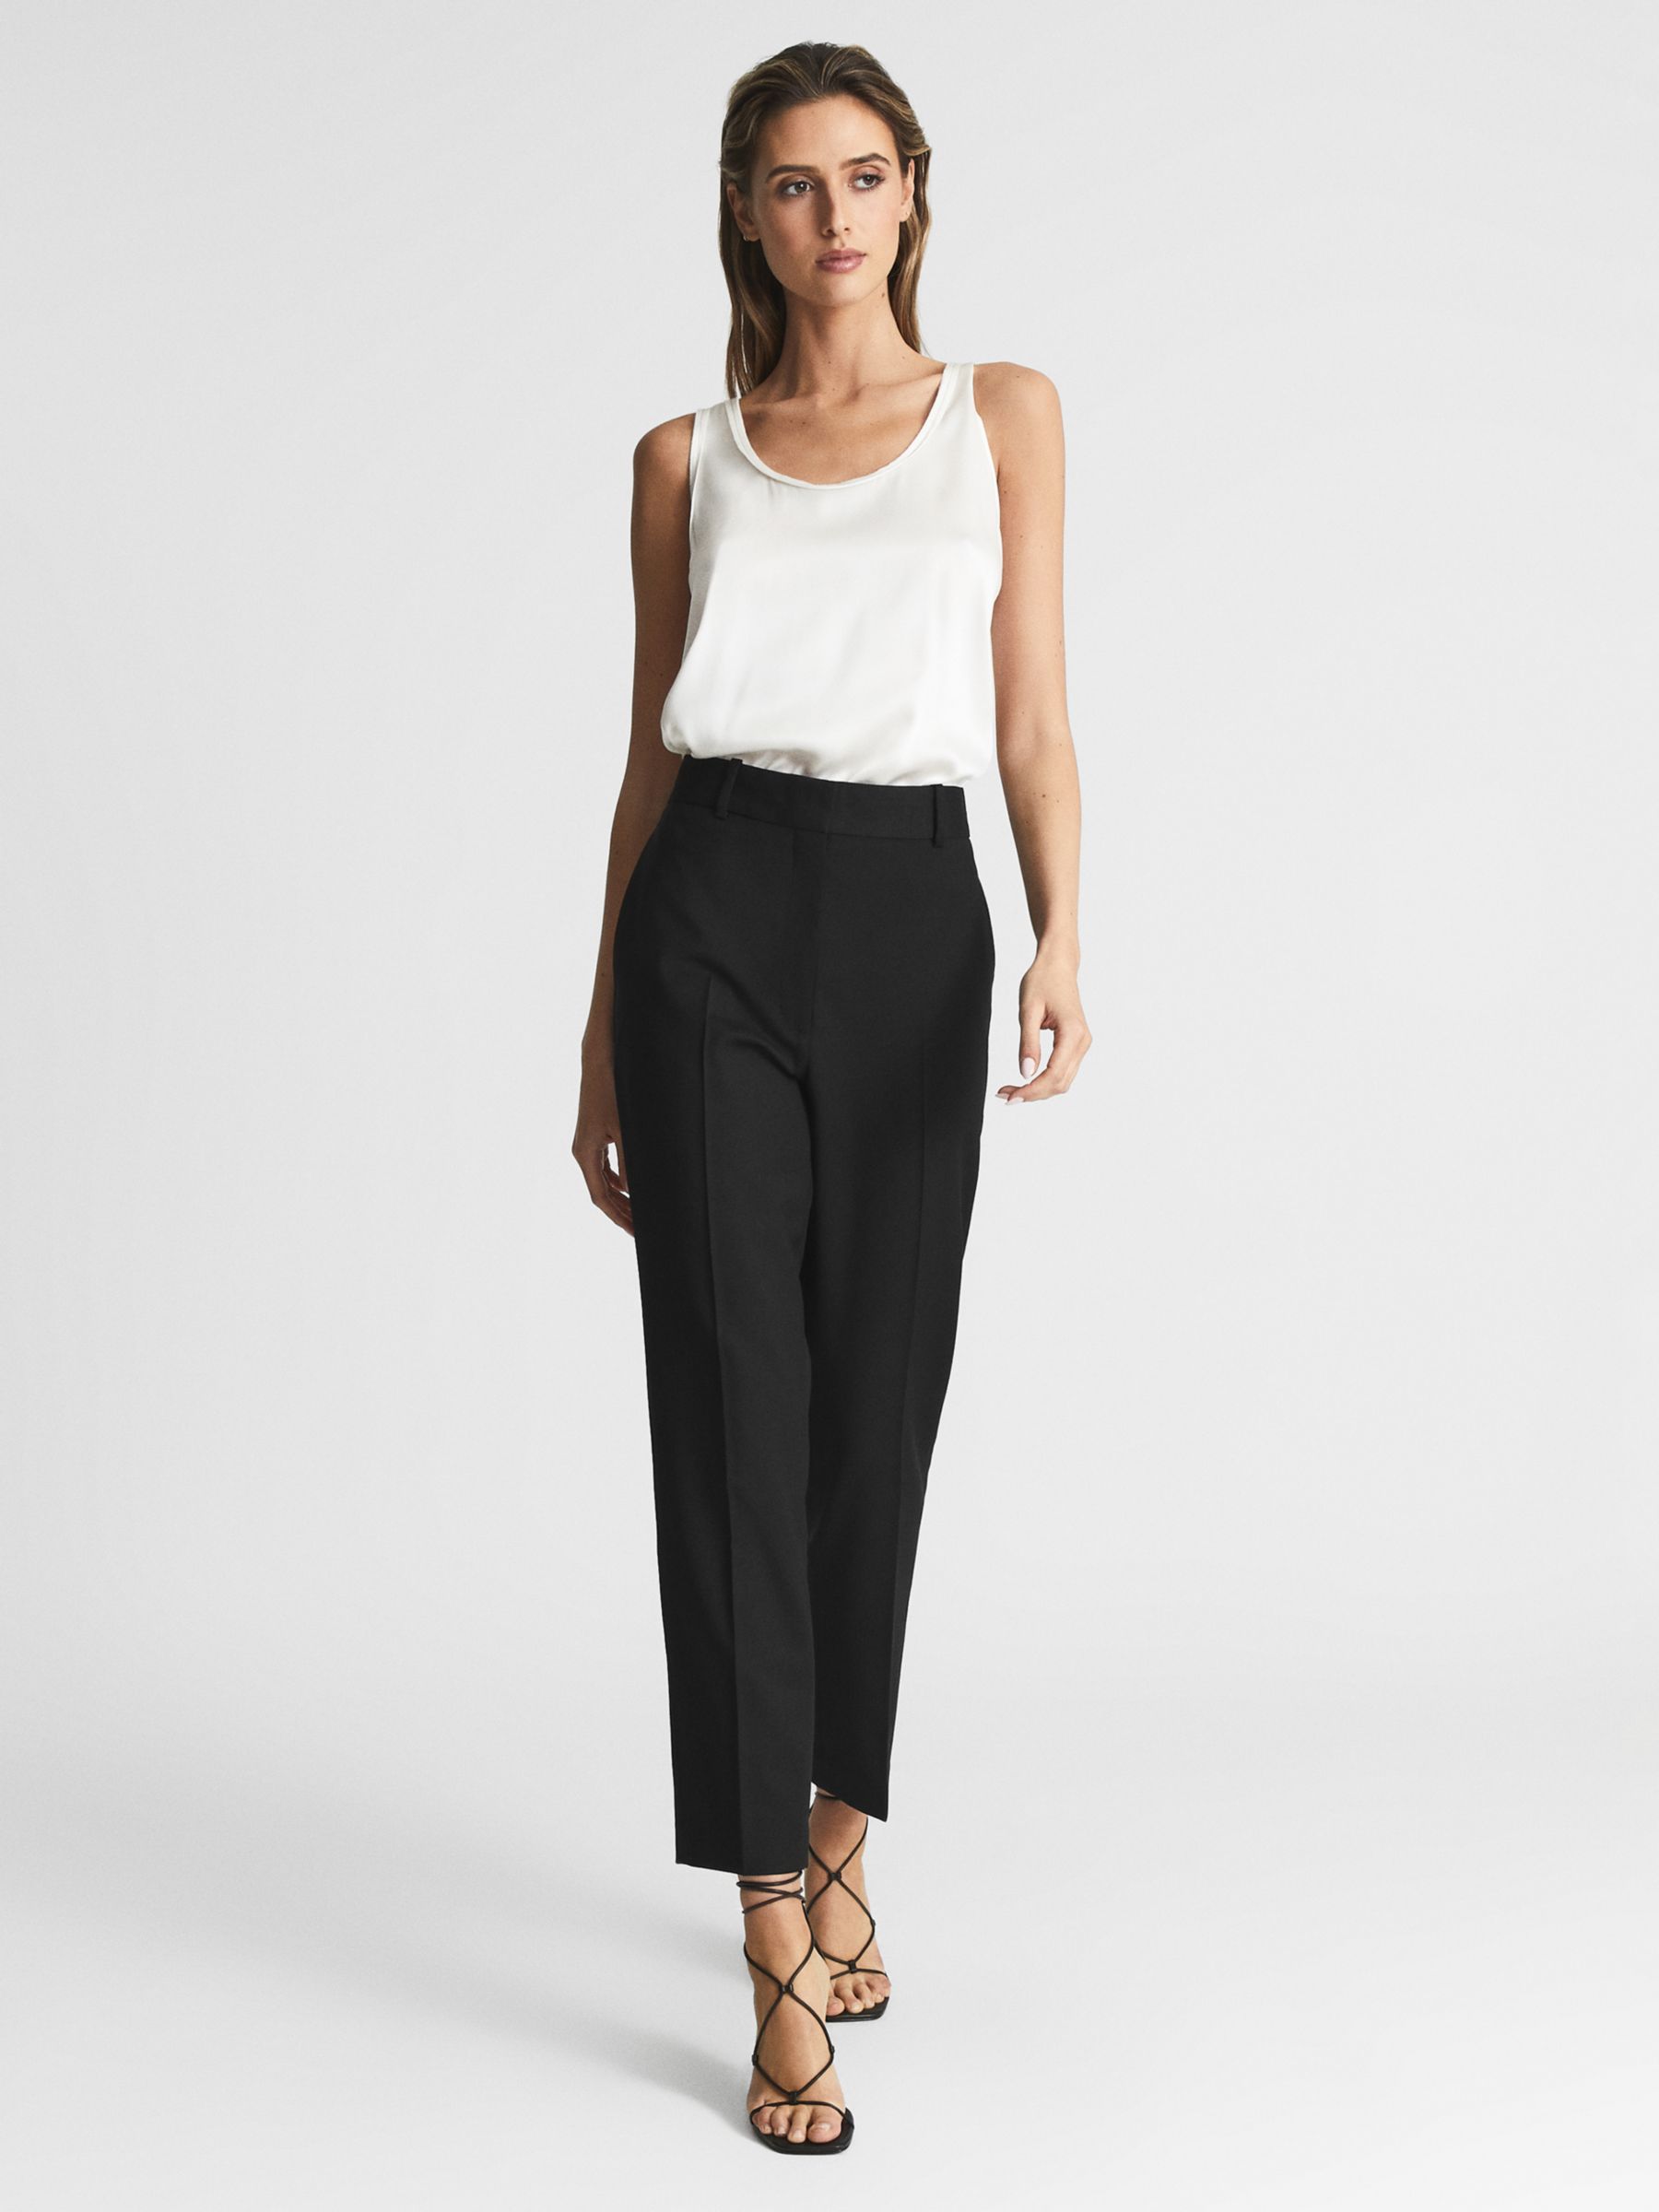 Buy Reiss Petite Haisley Wool Blend Tapered Trousers Online at johnlewis.com